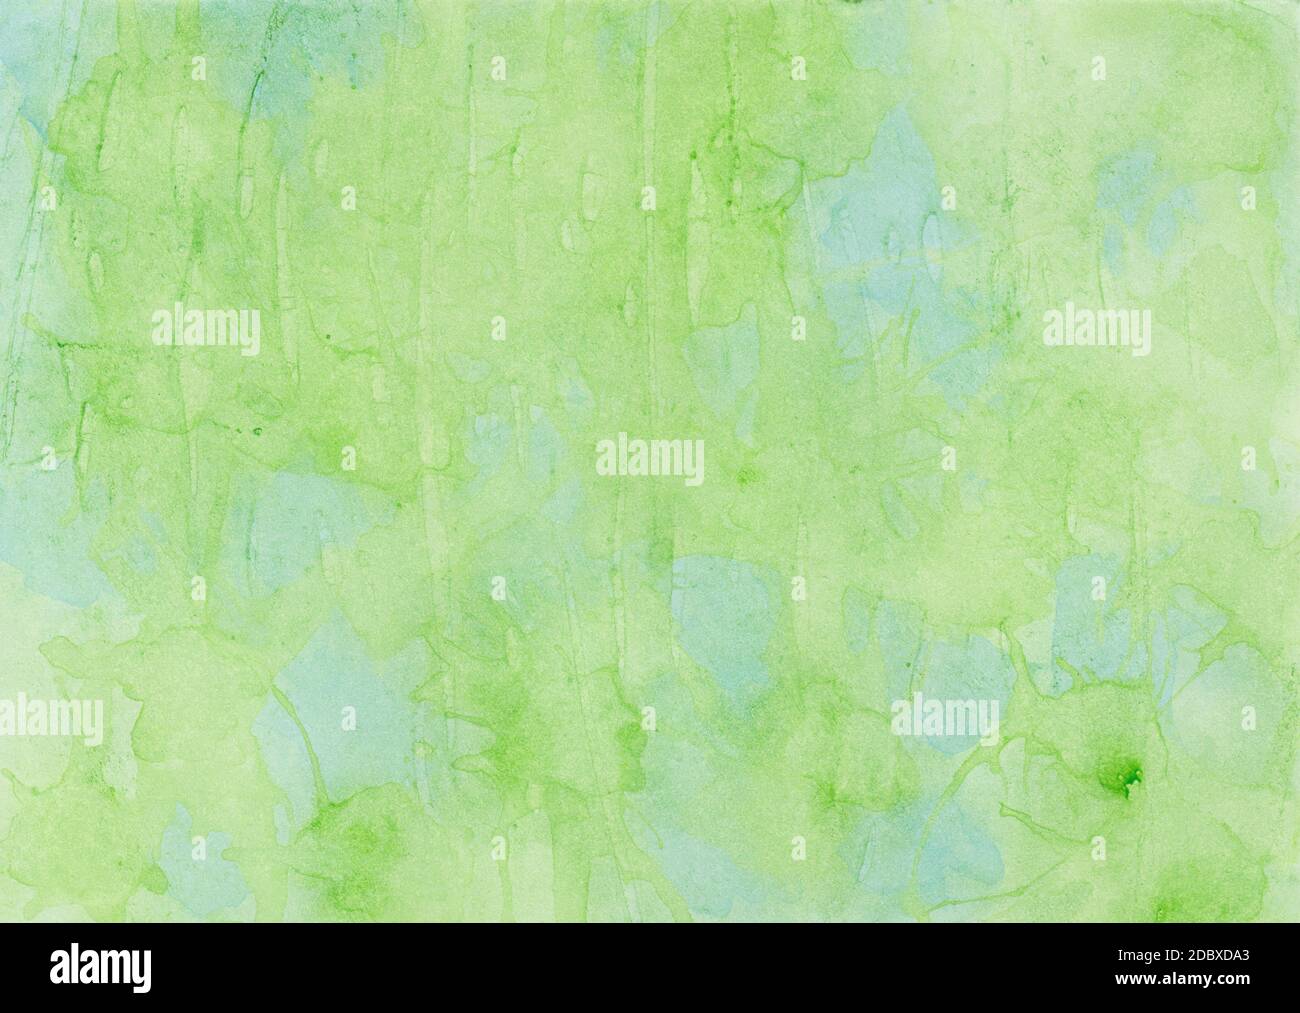 Hand painted watercolor wash background foil printing in green and blue Stock Photo